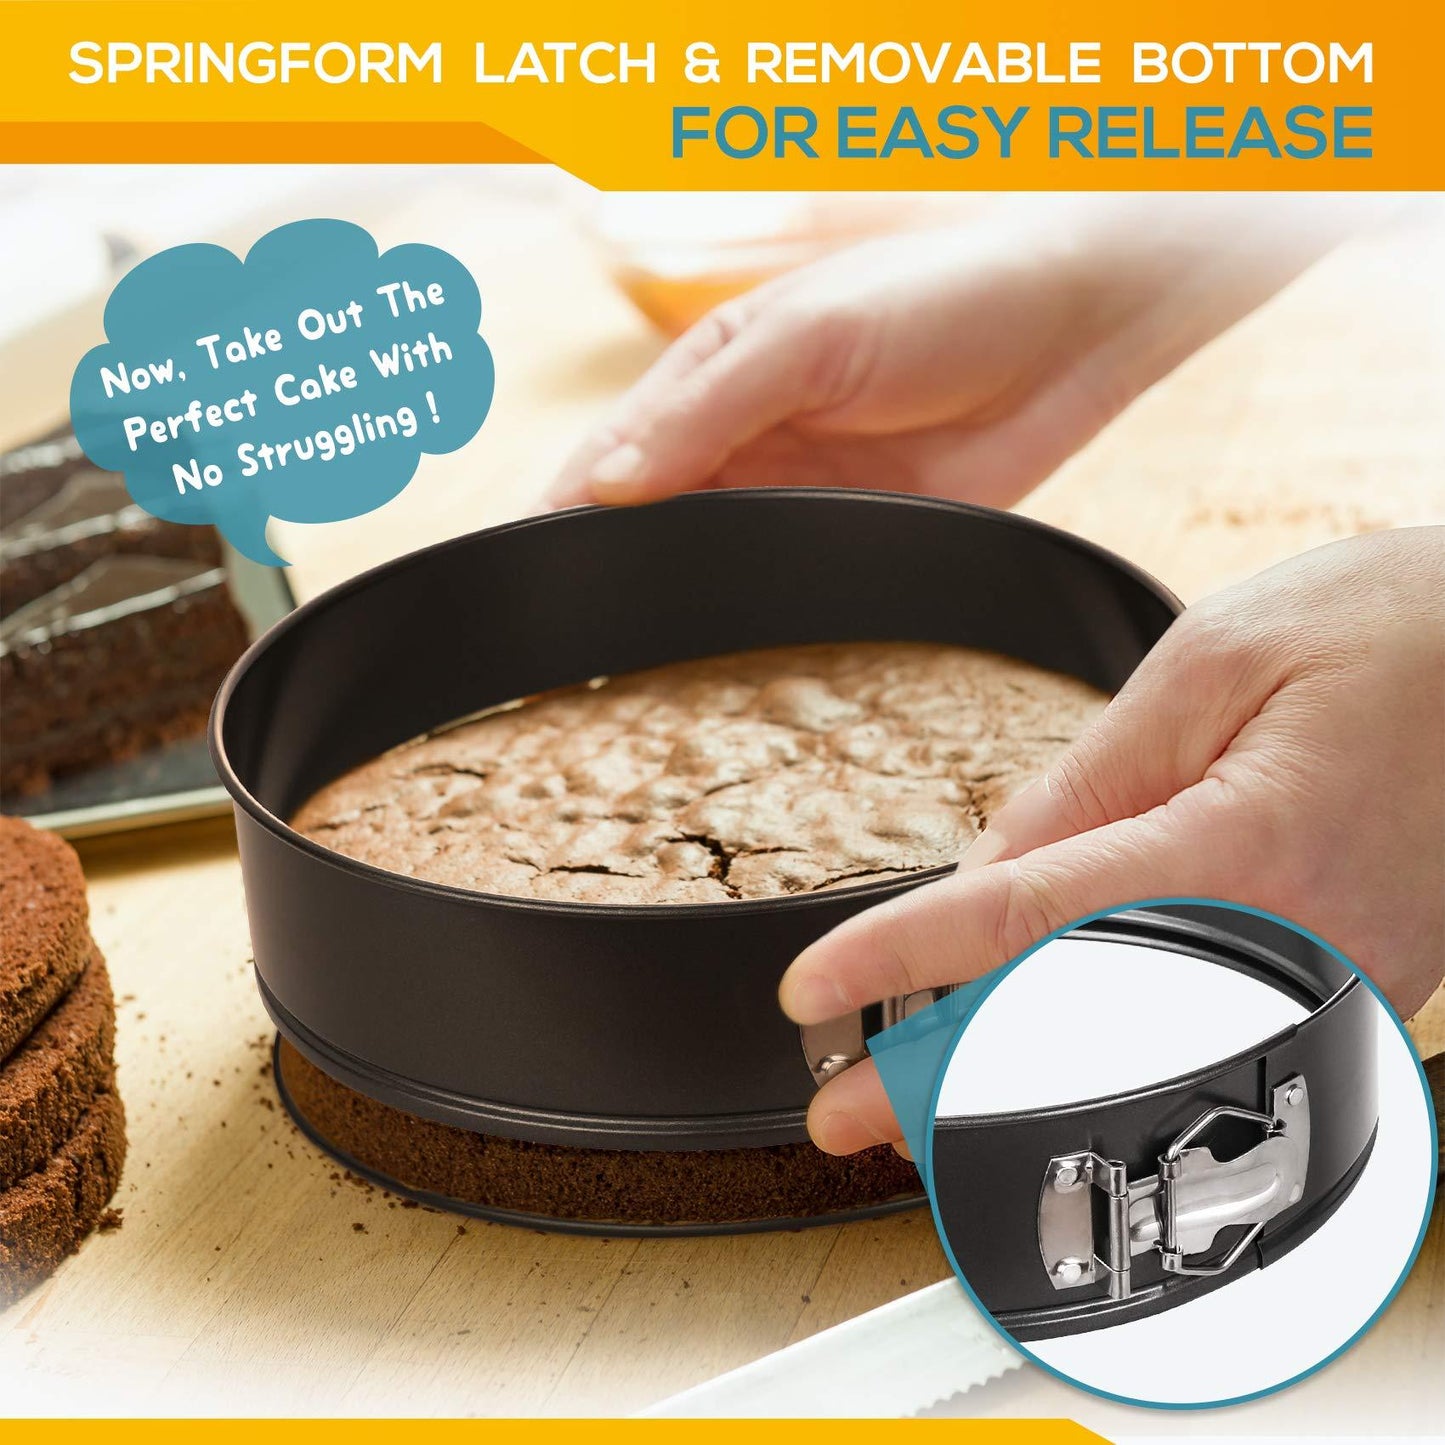 HIWARE Springform Pan Set of 3 Non-stick Cheesecake Pan, Leakproof Round Cake Pan Set Includes 3 Pieces 6" 8" 10" Springform Pans with 150 Pcs Parchment Paper Liners - CookCave